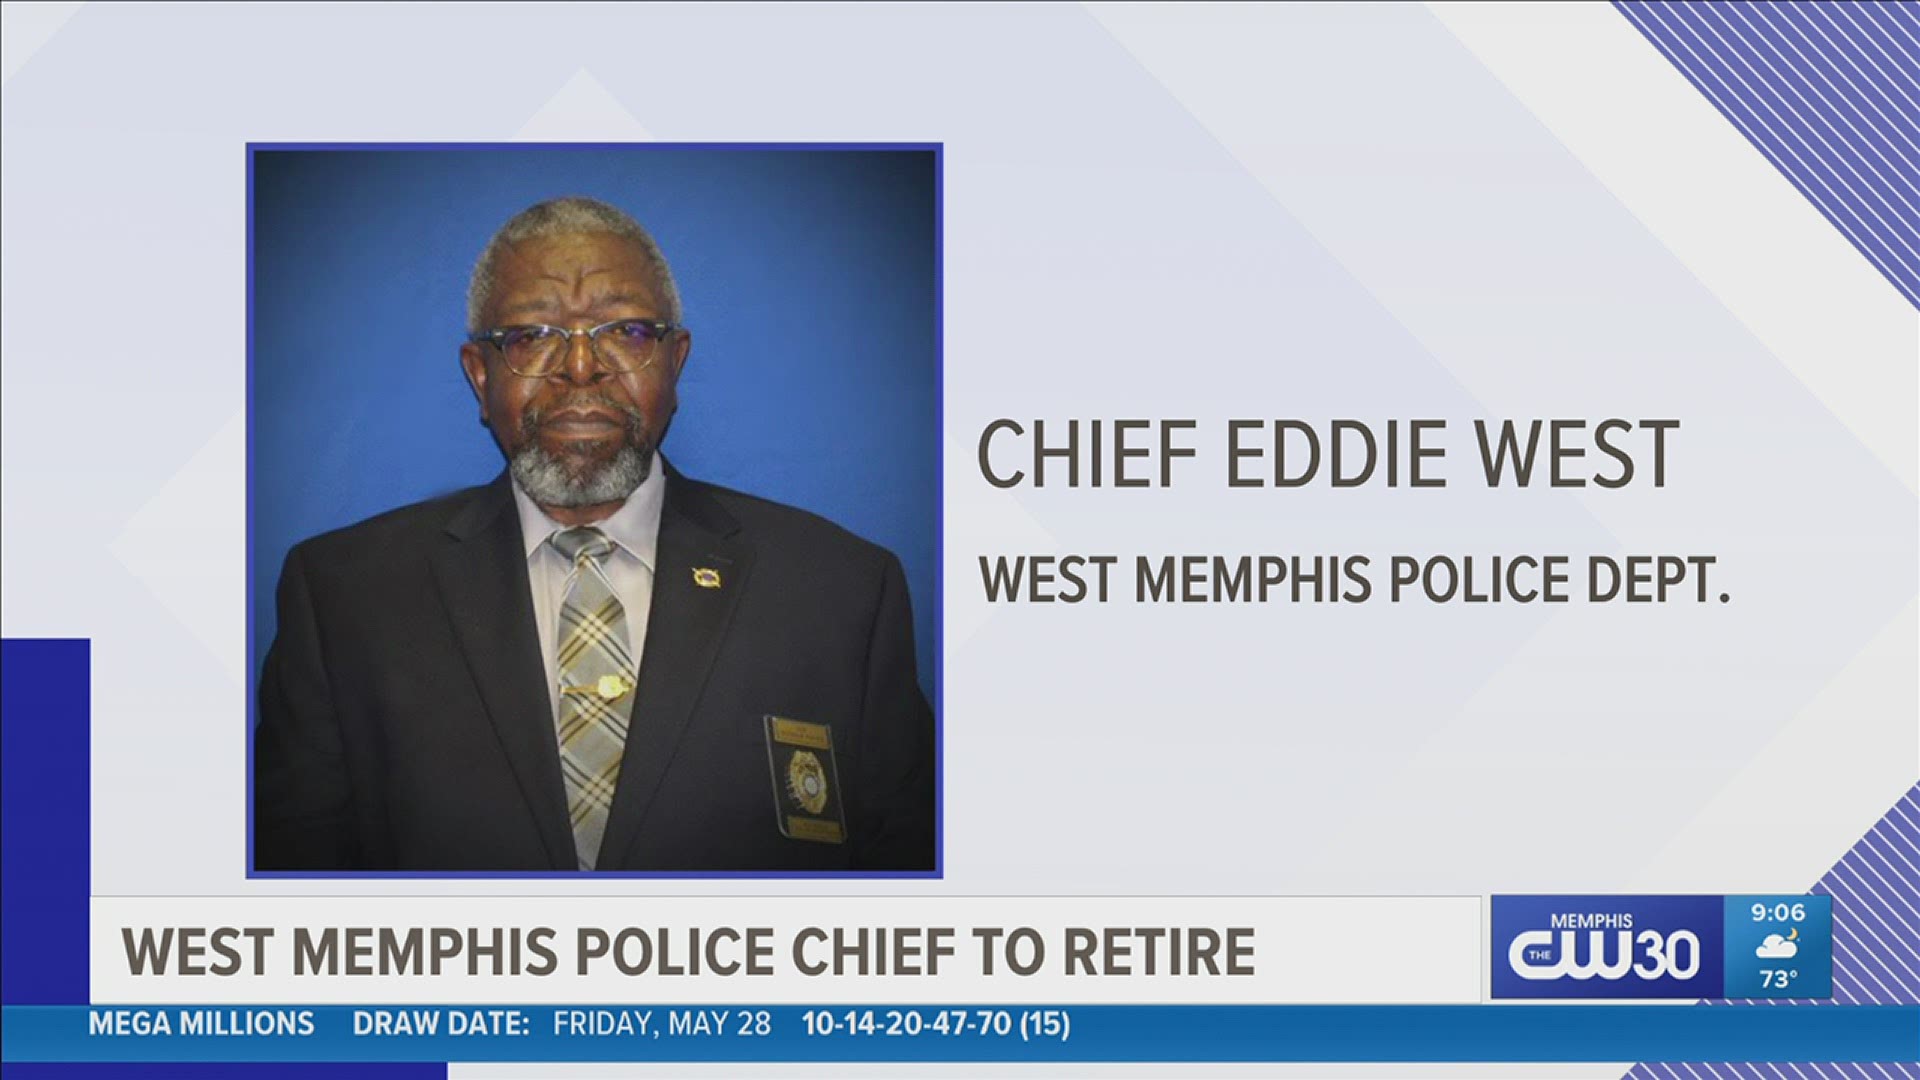 Chief Eddie West will retire July 31, 2021, after 40 years of service to the community.